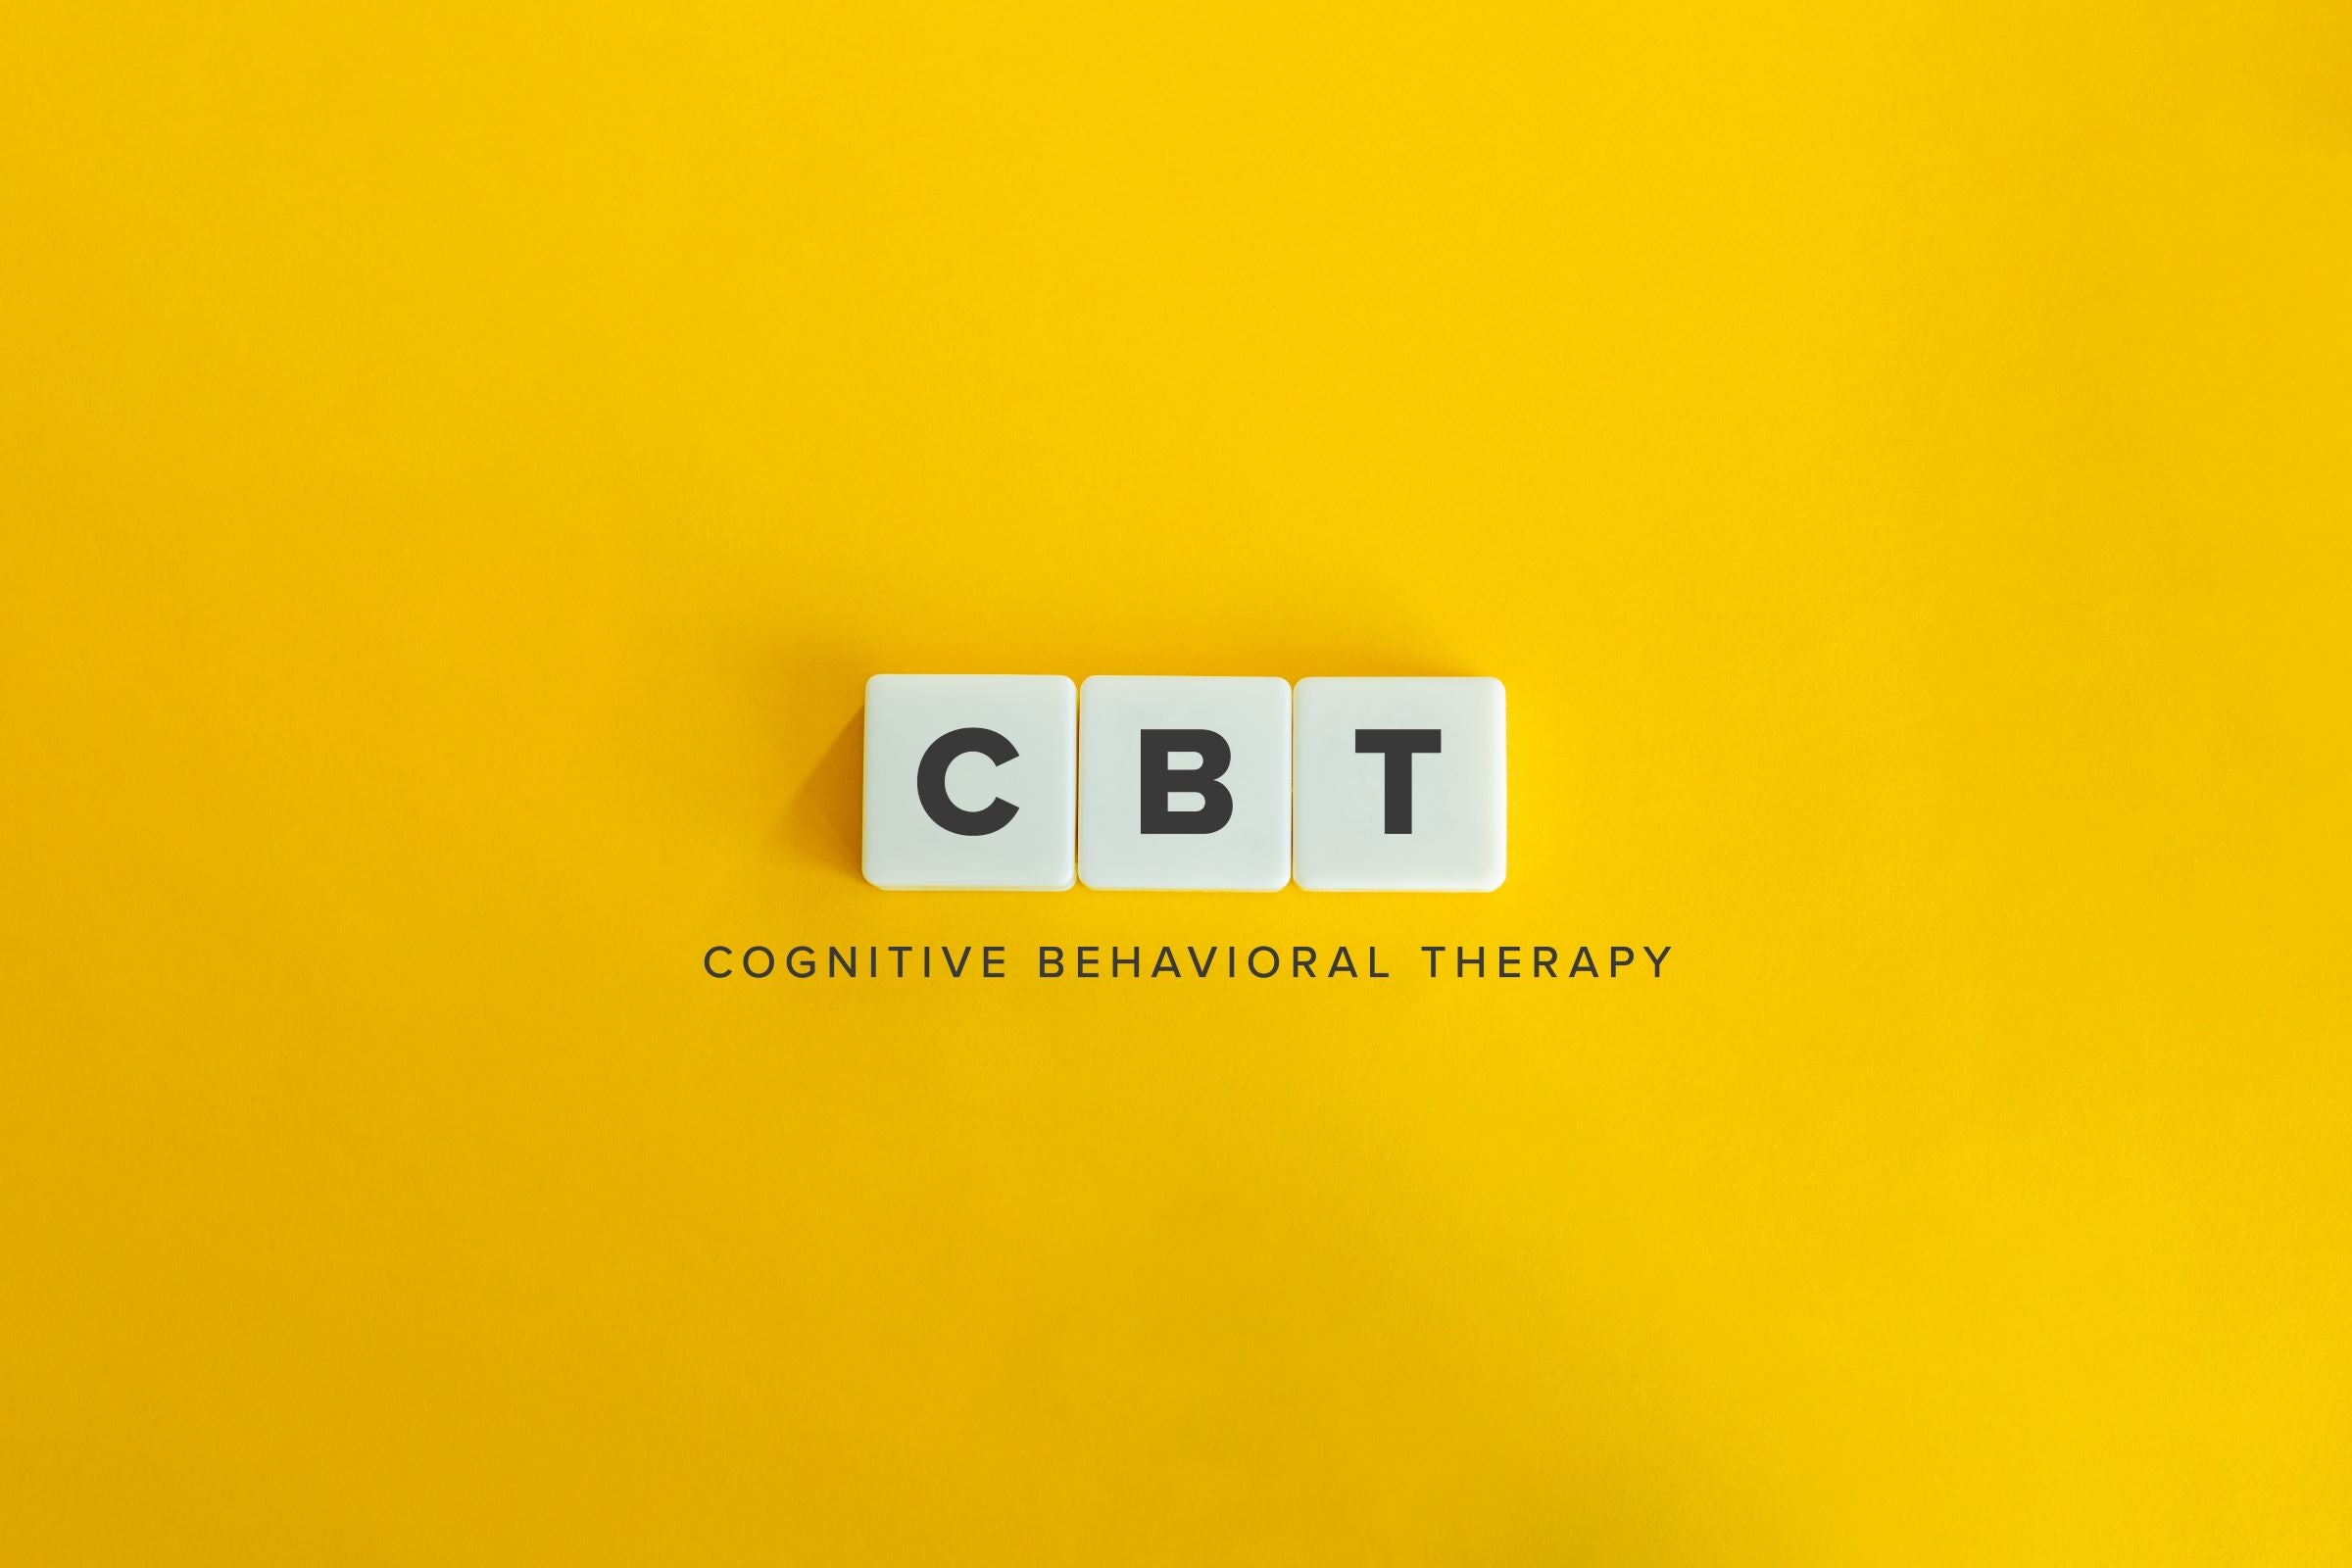 How To Sleep Better with CBT?